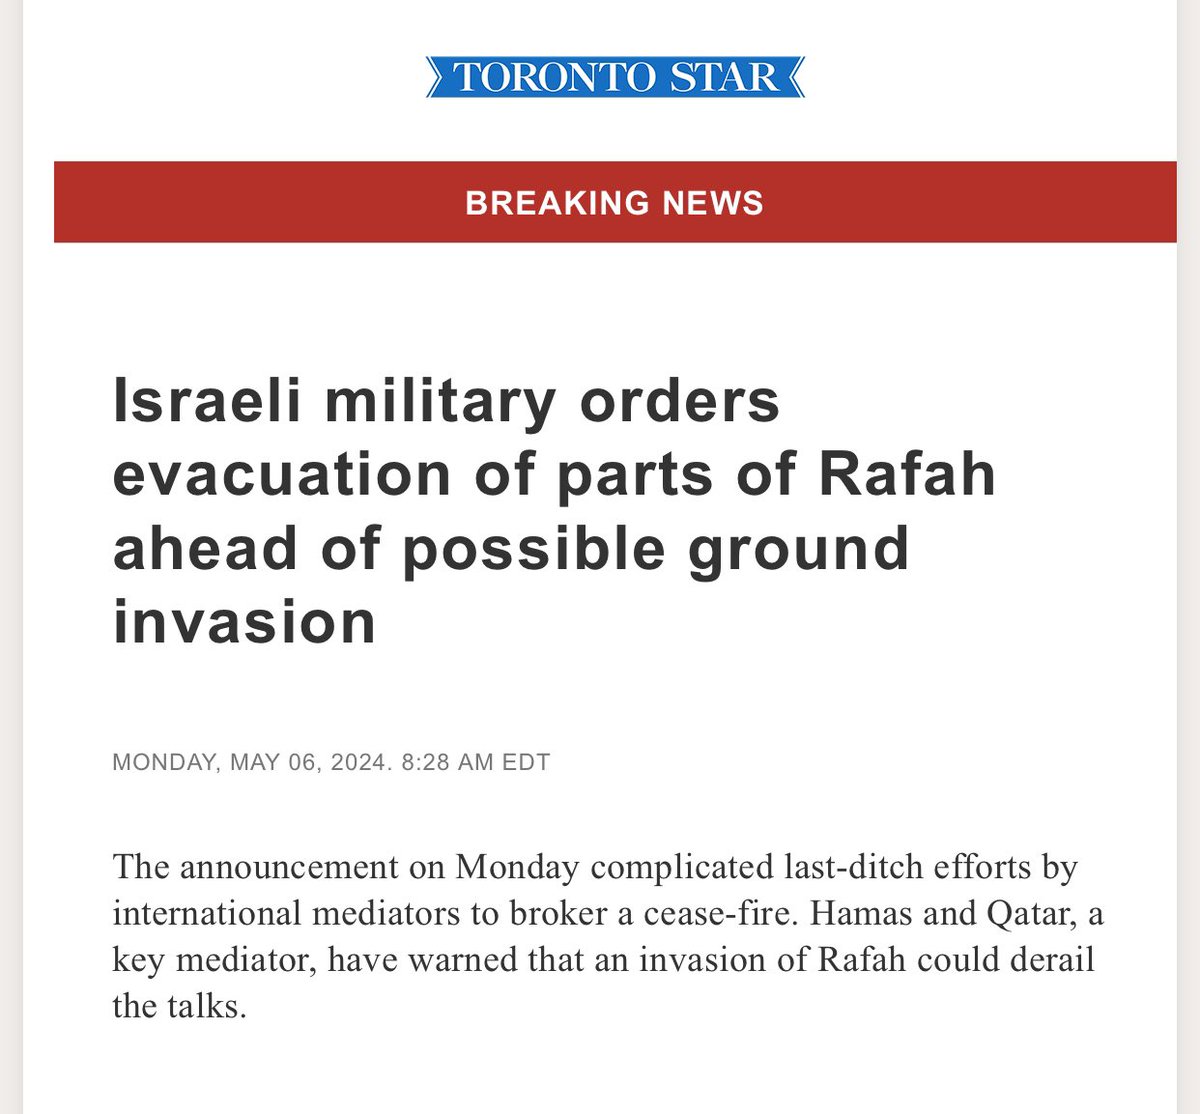 The Israeli military has no authority to ‘order’ an evacuation of Rafah. Rafah lies on occupied Palestinian territory. Israel’s occupation of that territory is illegal. Moreover, in the course of its genocidal rampage in the Gaza Strip, Israel intentionally forced well over 1…